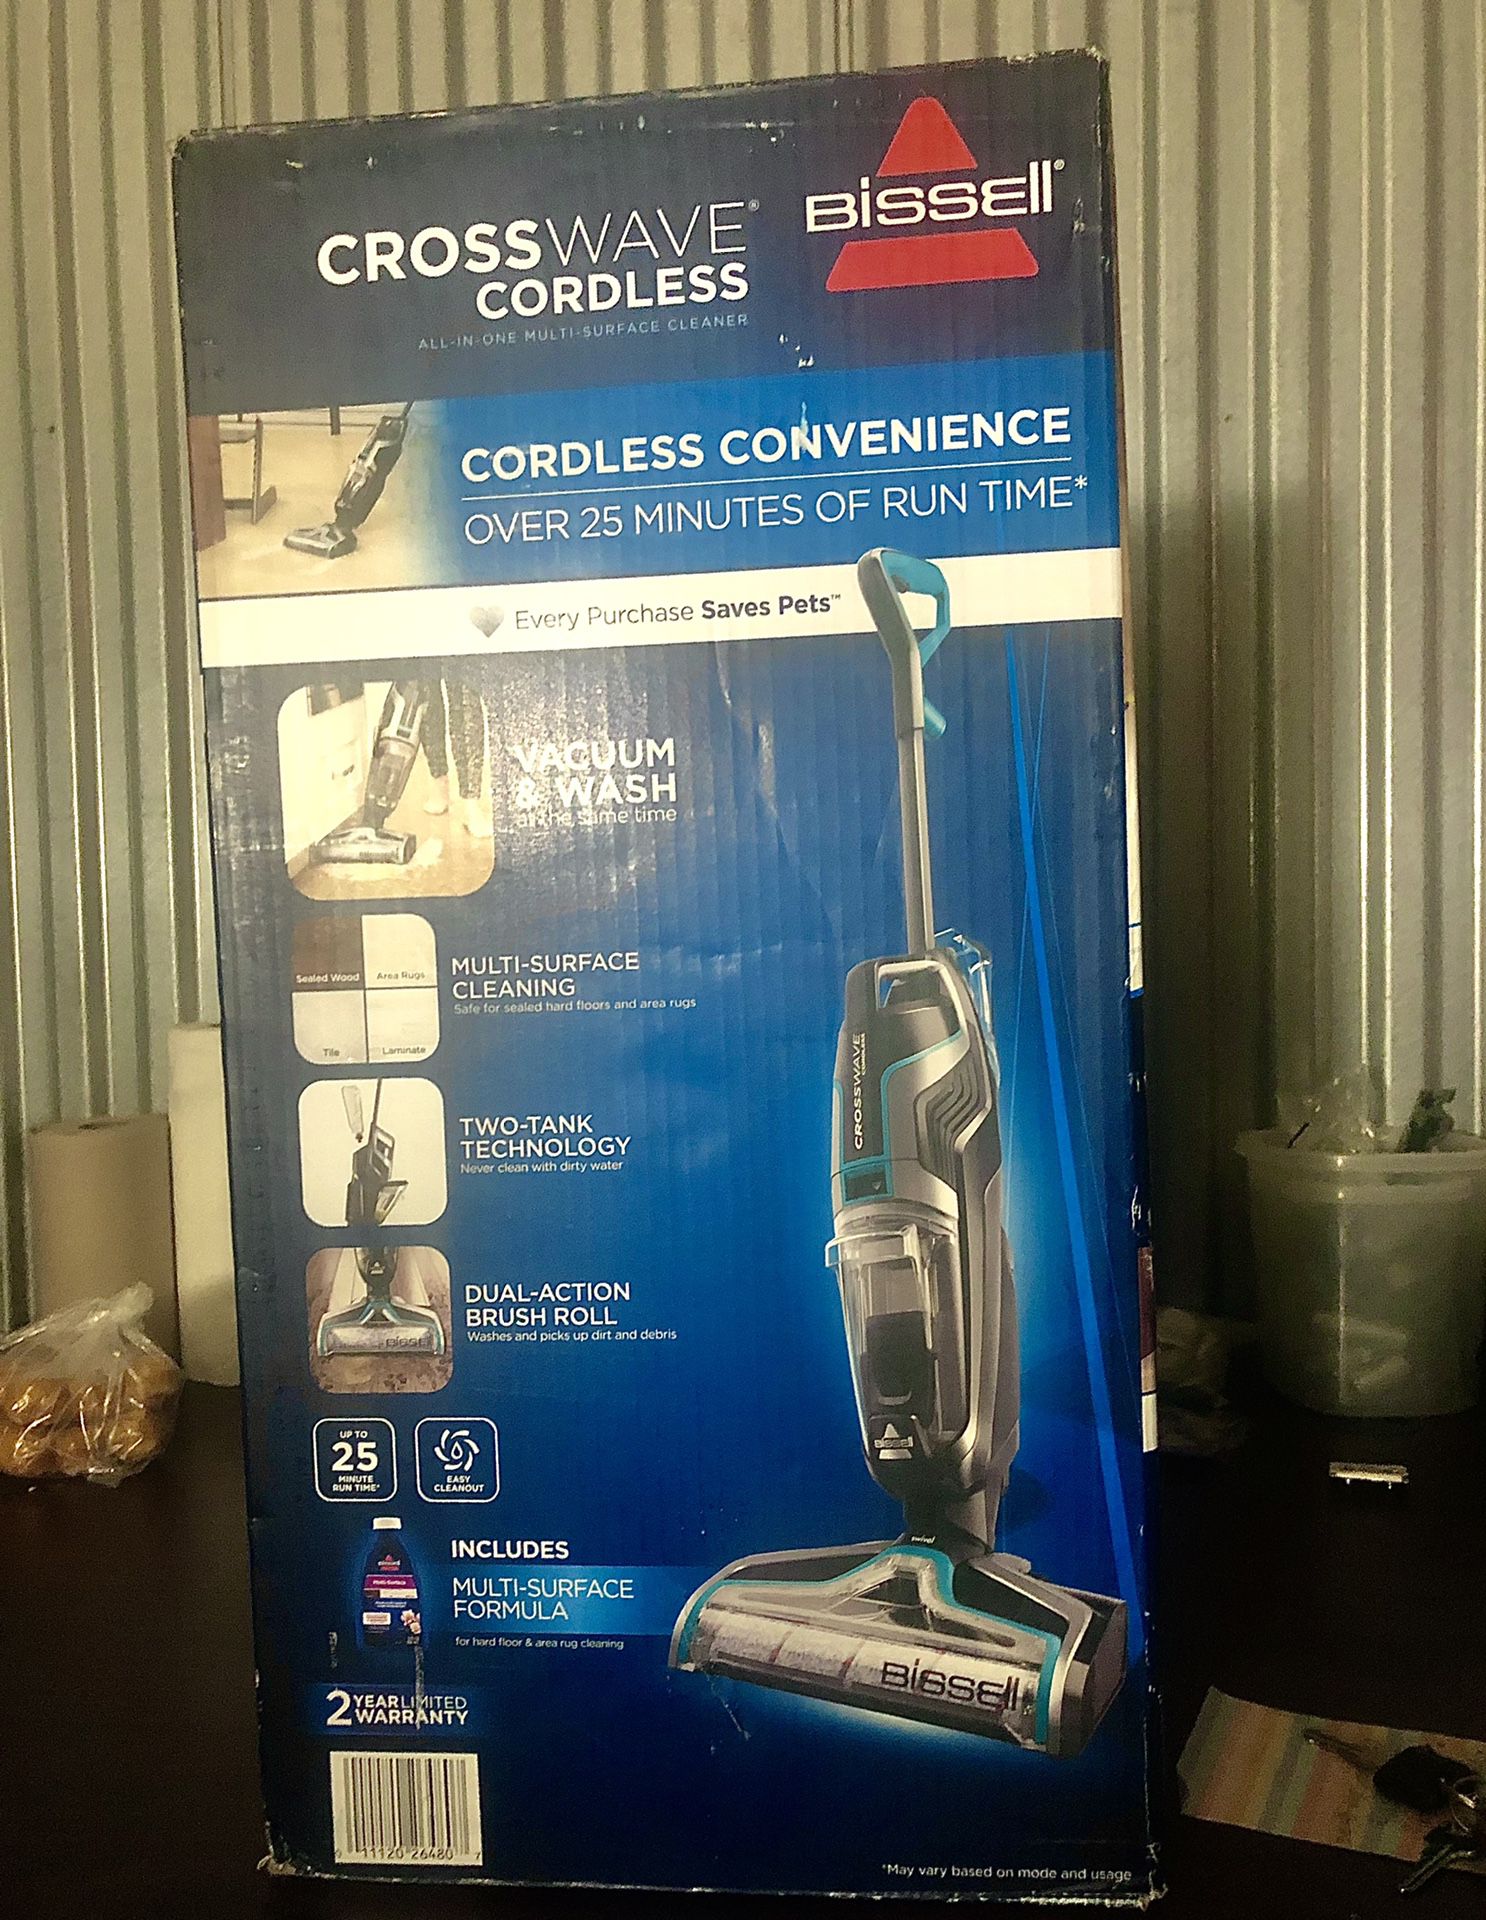 New Bissell Crosswave Cordless All-In-One Multi-Surface Cleaner